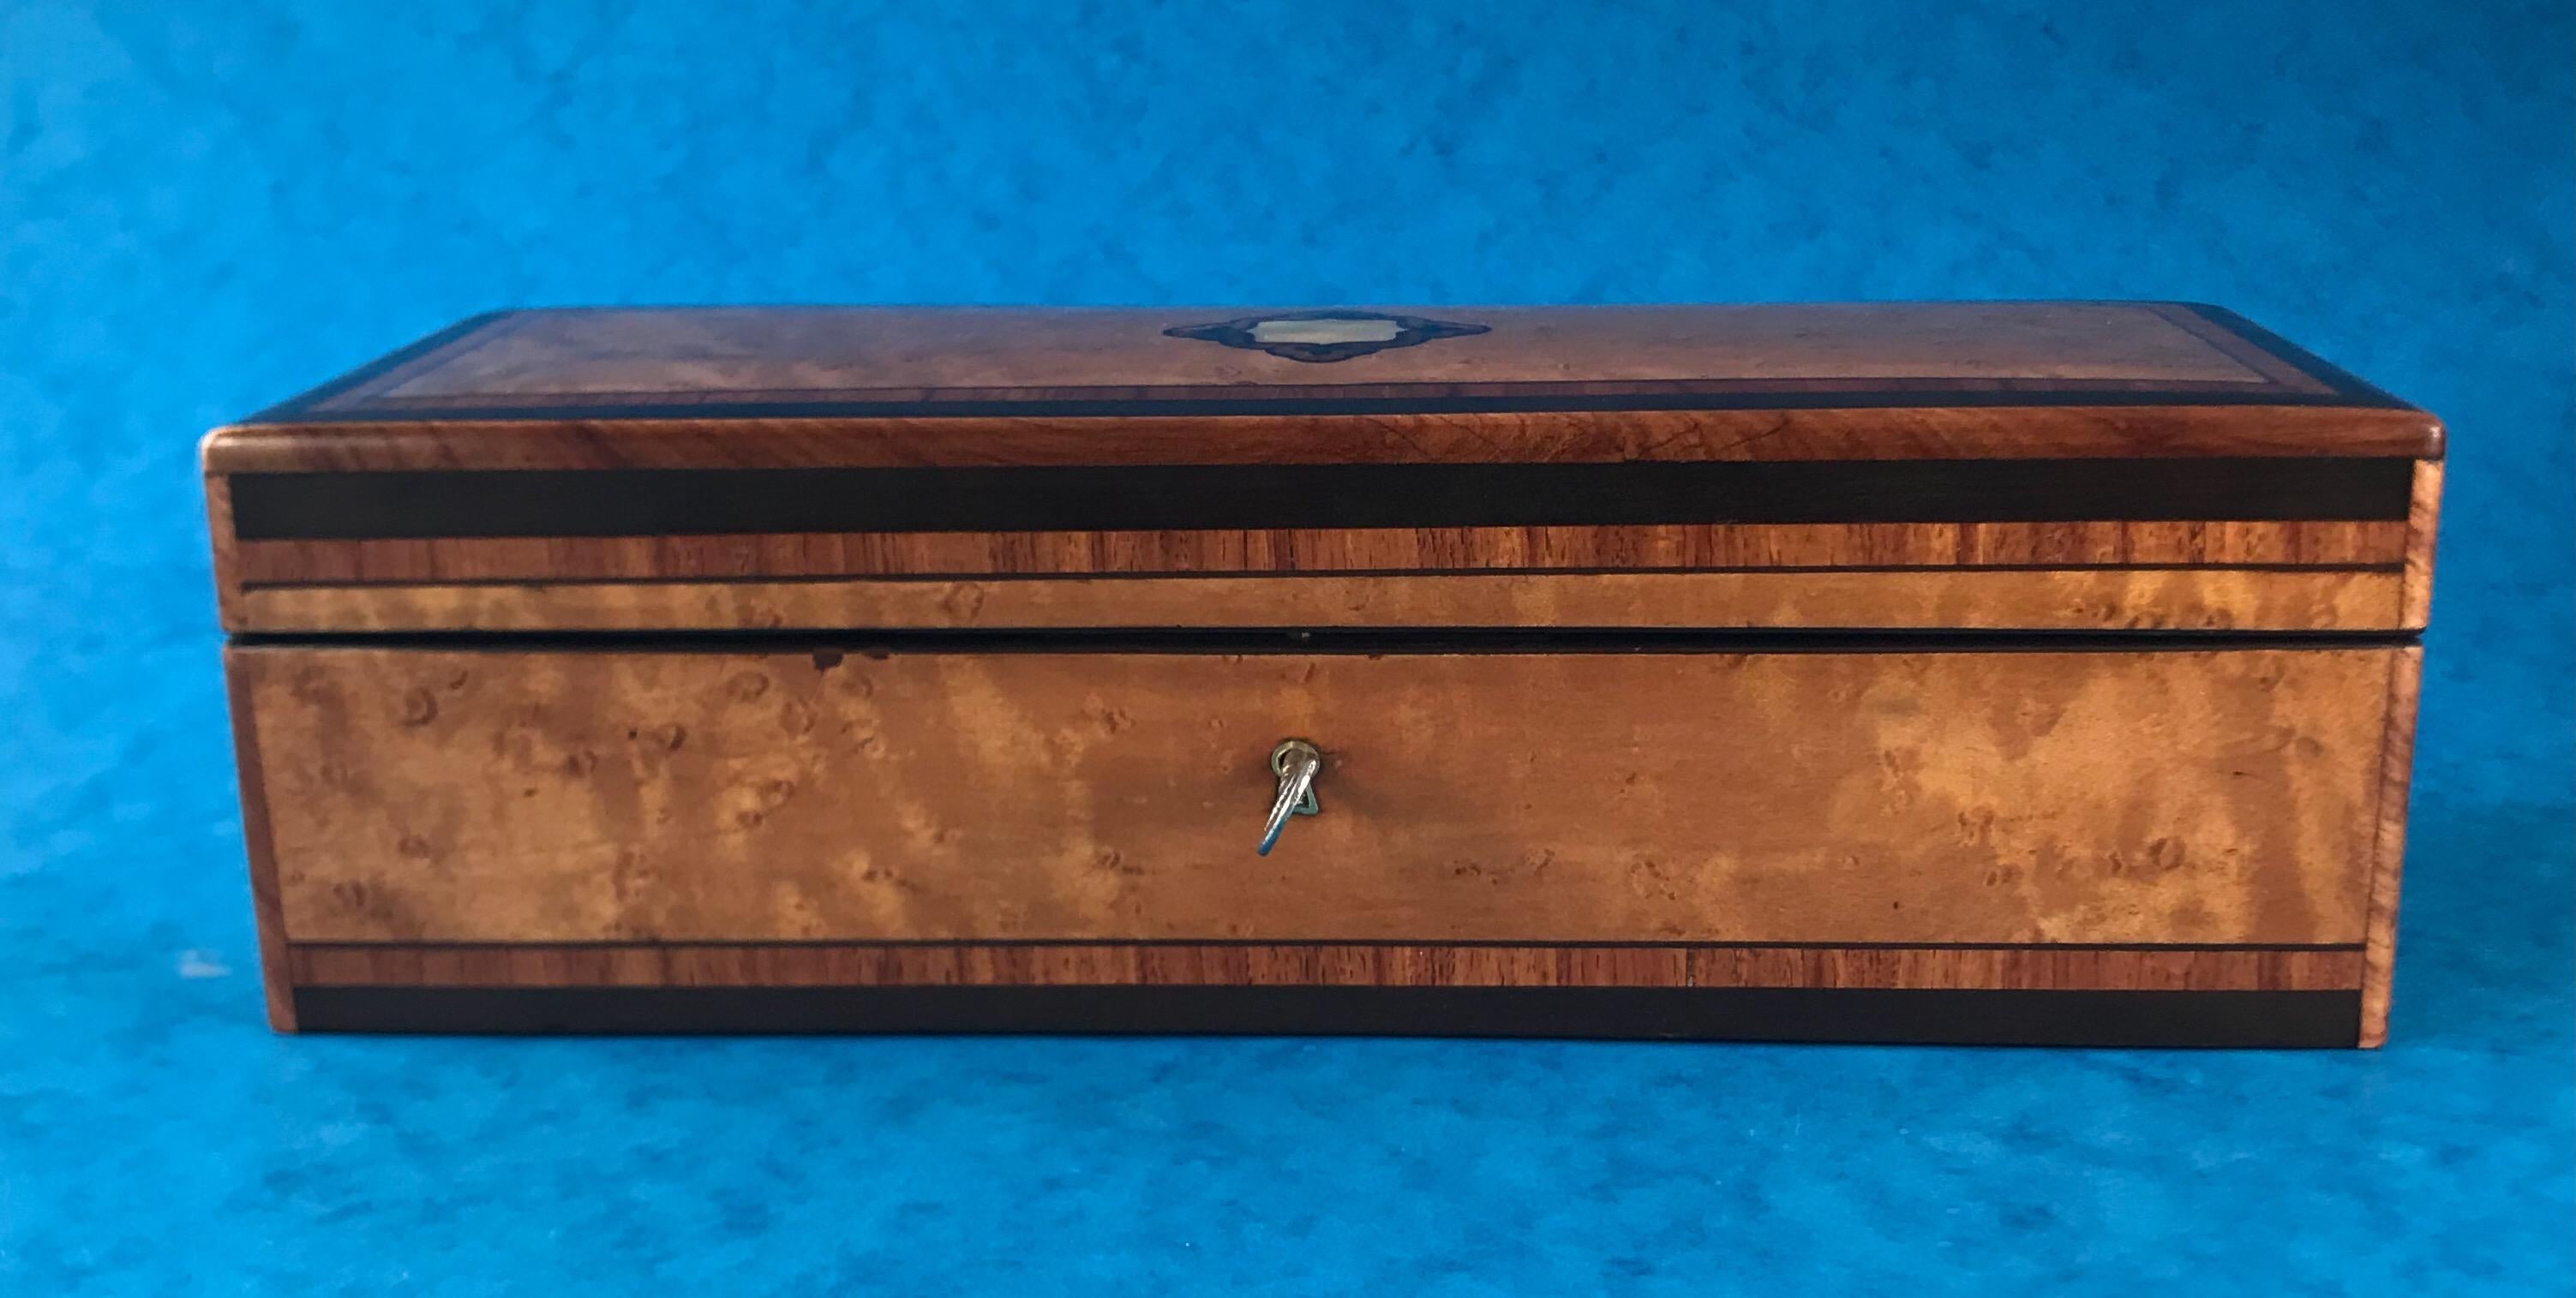 A wonderful French 1870 Burr maple, Tulipwood cross banded ,ebony inlaid glove box, with a rosewood interior and a fall down front. it has a working lock and key and it It measures 30.5 by 11.5 and stands 9.5 cm high.

